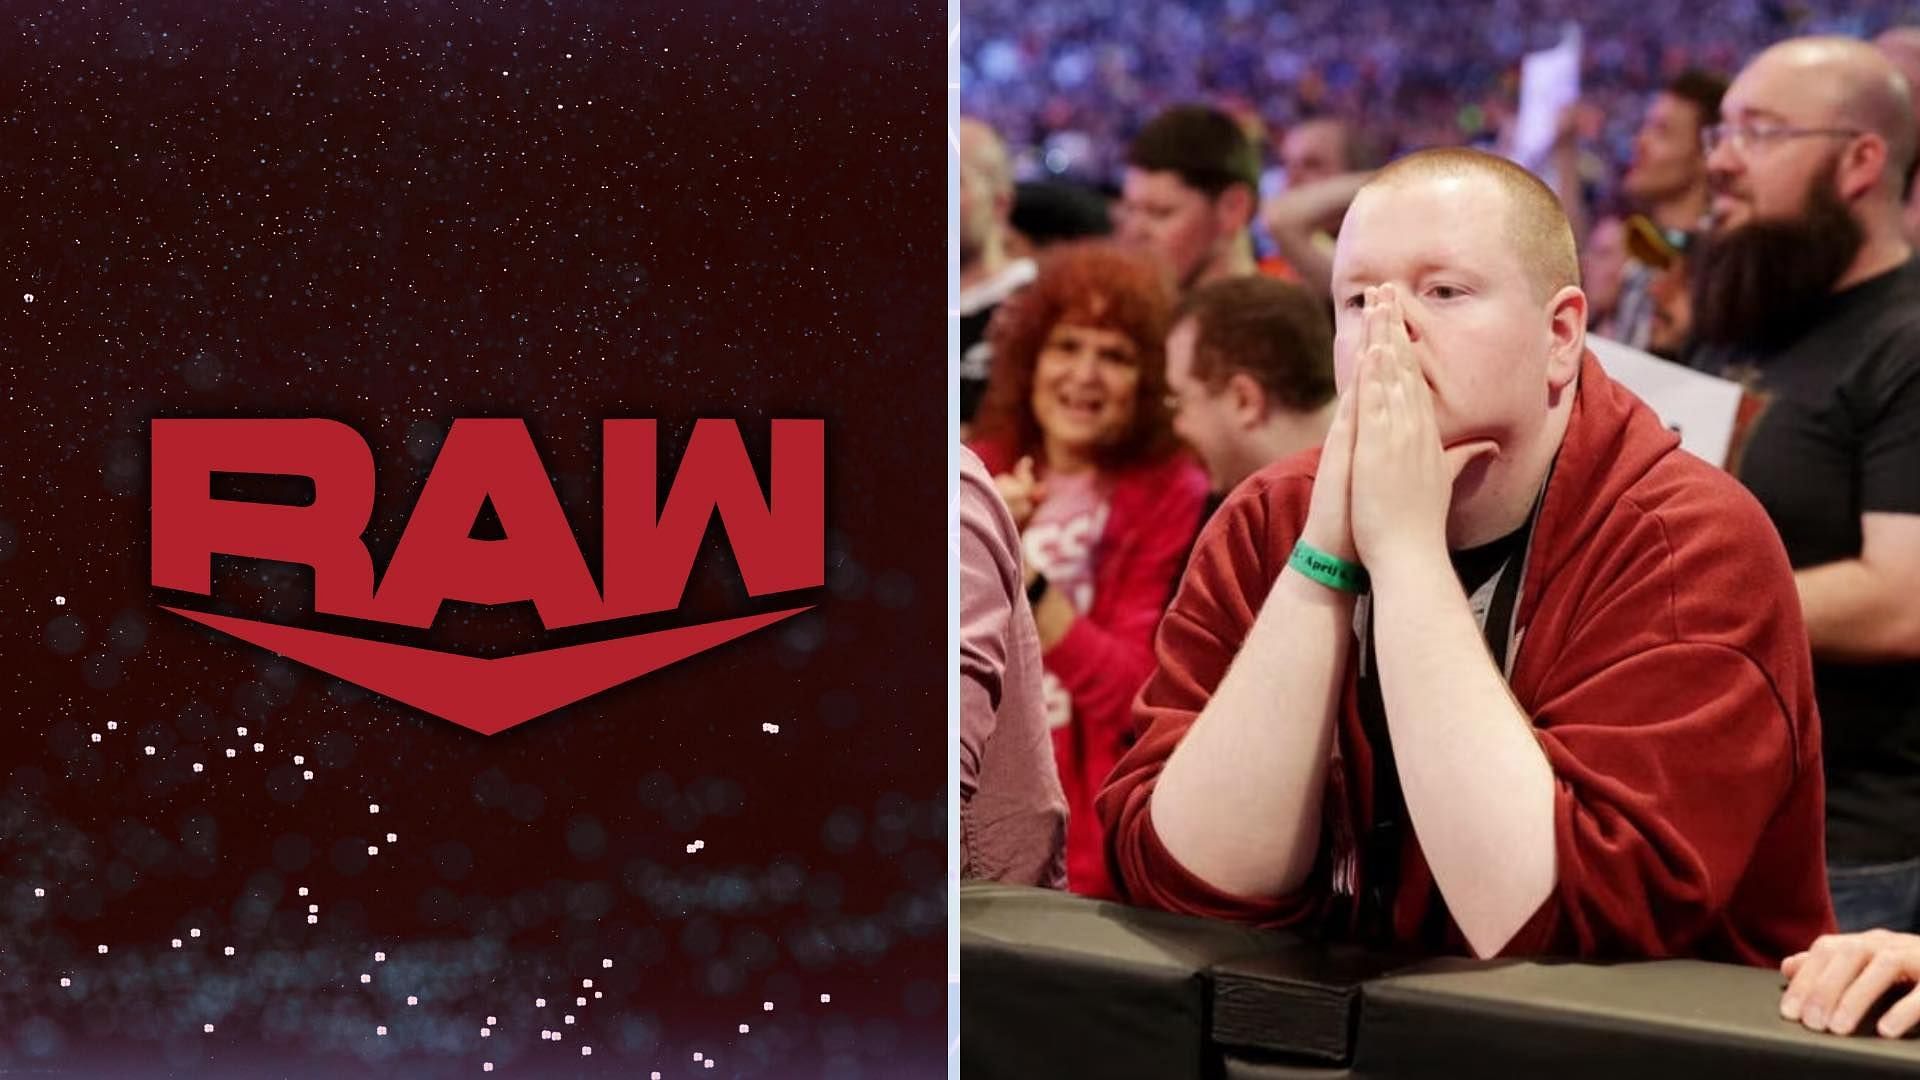 WWE RAW this week was live from the American Airlines Center in Dallas, Texas